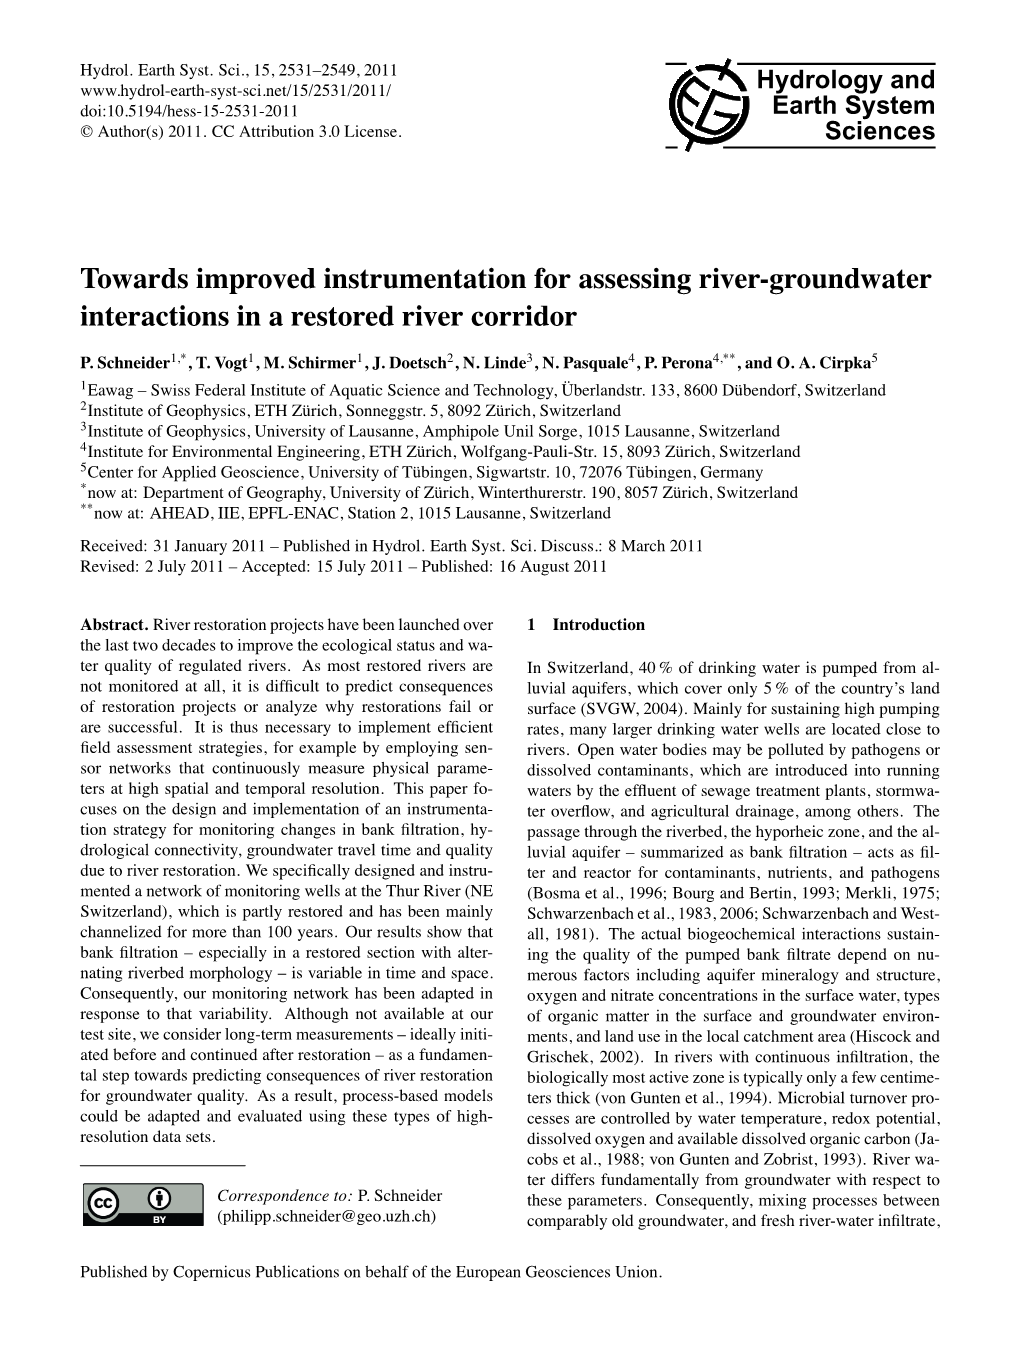 Towards Improved Instrumentation for Assessing River-Groundwater Interactions in a Restored River Corridor